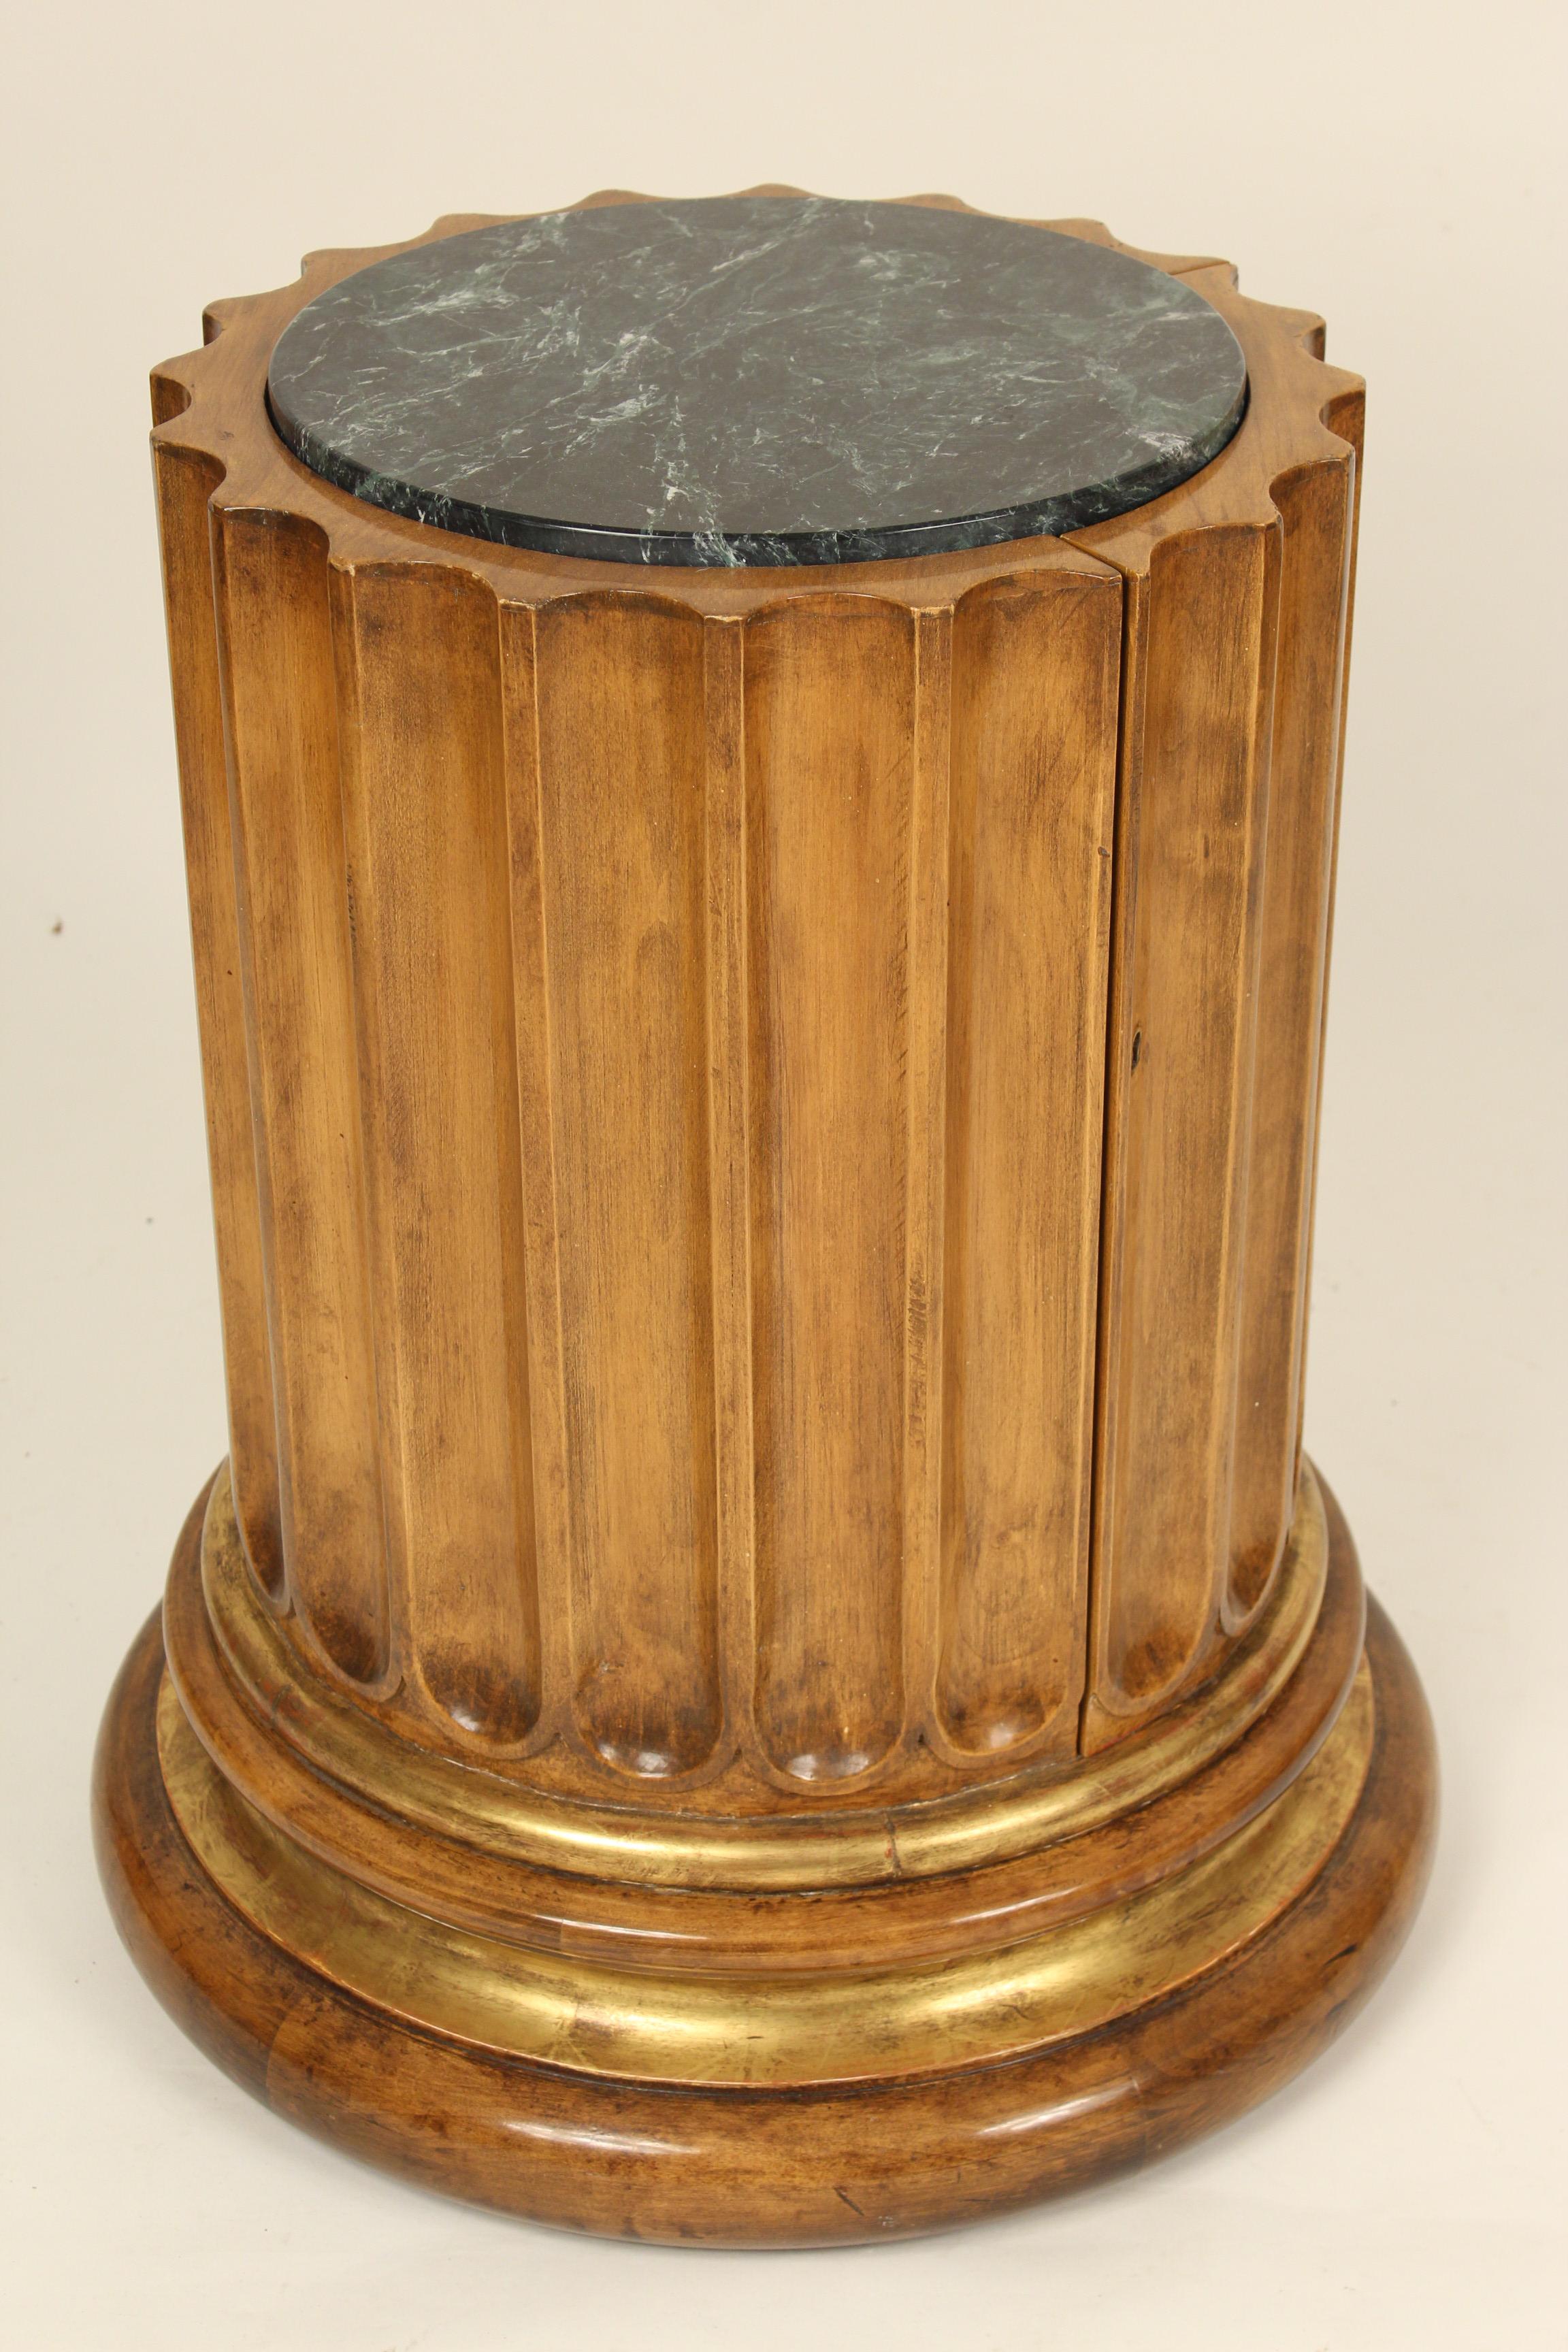 Neoclassical Columnar form occasional table attributed to Therien and Company